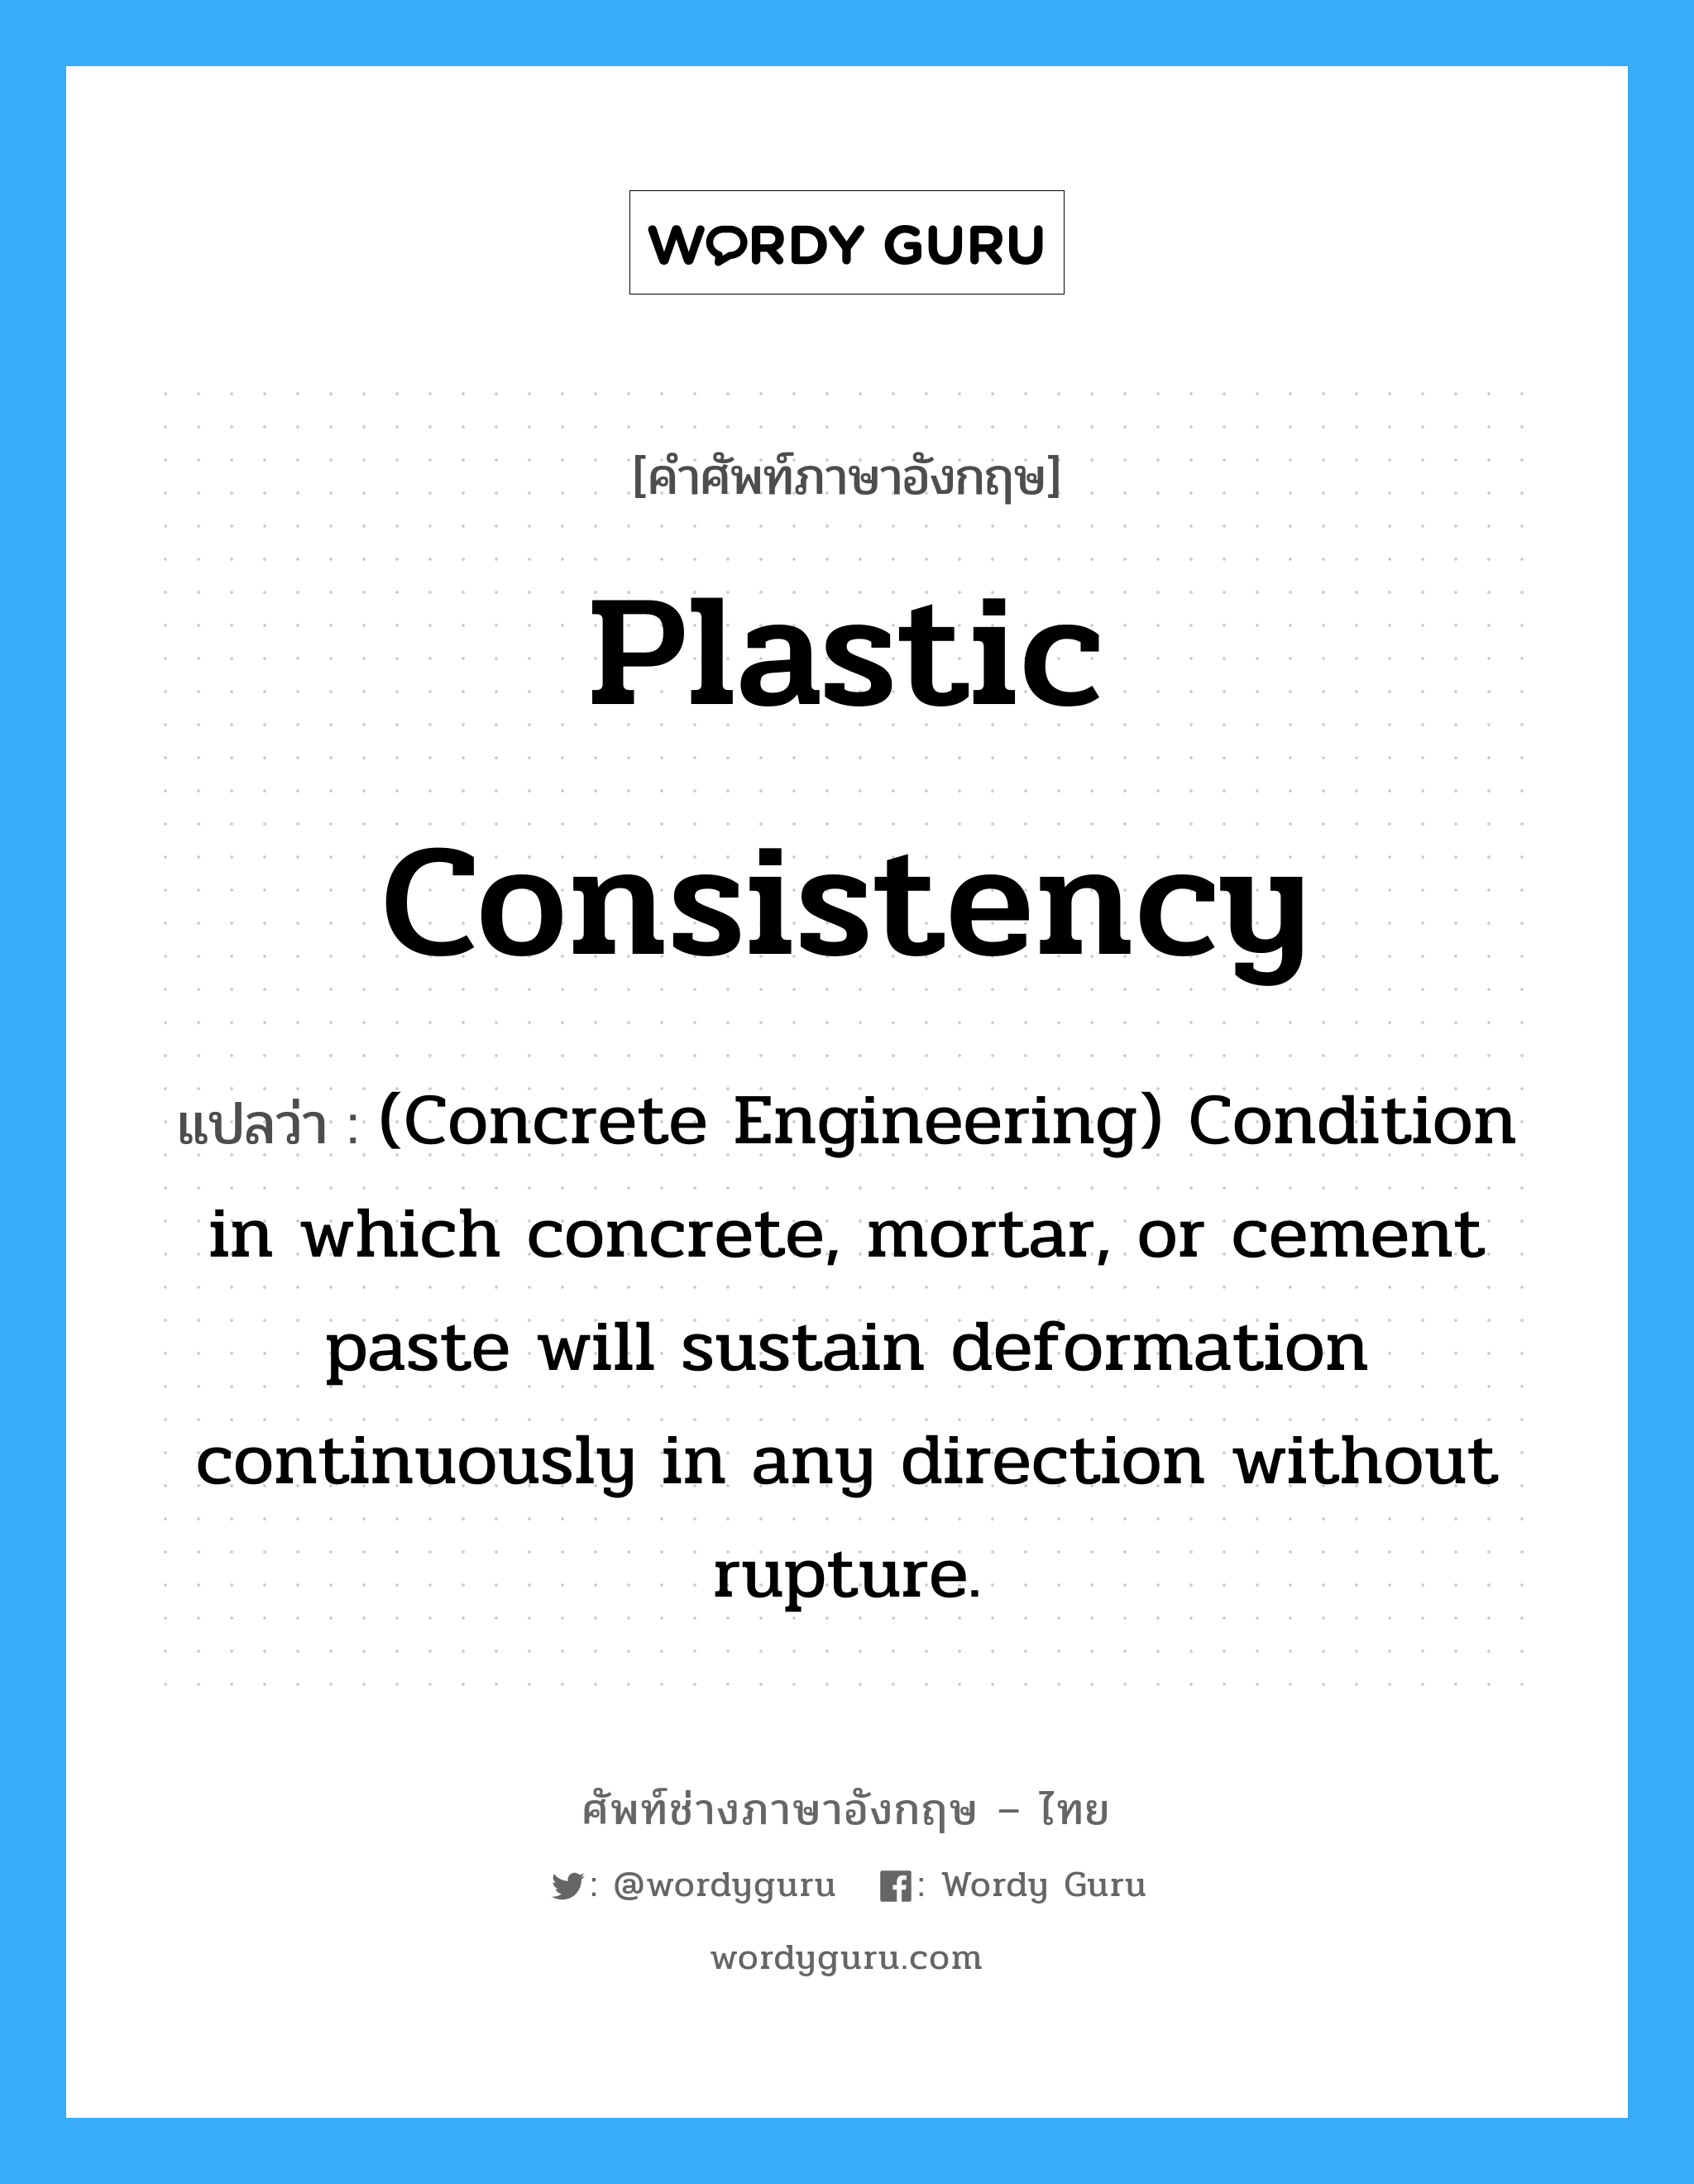 Plastic Consistency แปลว่า?, คำศัพท์ช่างภาษาอังกฤษ - ไทย Plastic Consistency คำศัพท์ภาษาอังกฤษ Plastic Consistency แปลว่า (Concrete Engineering) Condition in which concrete, mortar, or cement paste will sustain deformation continuously in any direction without rupture.